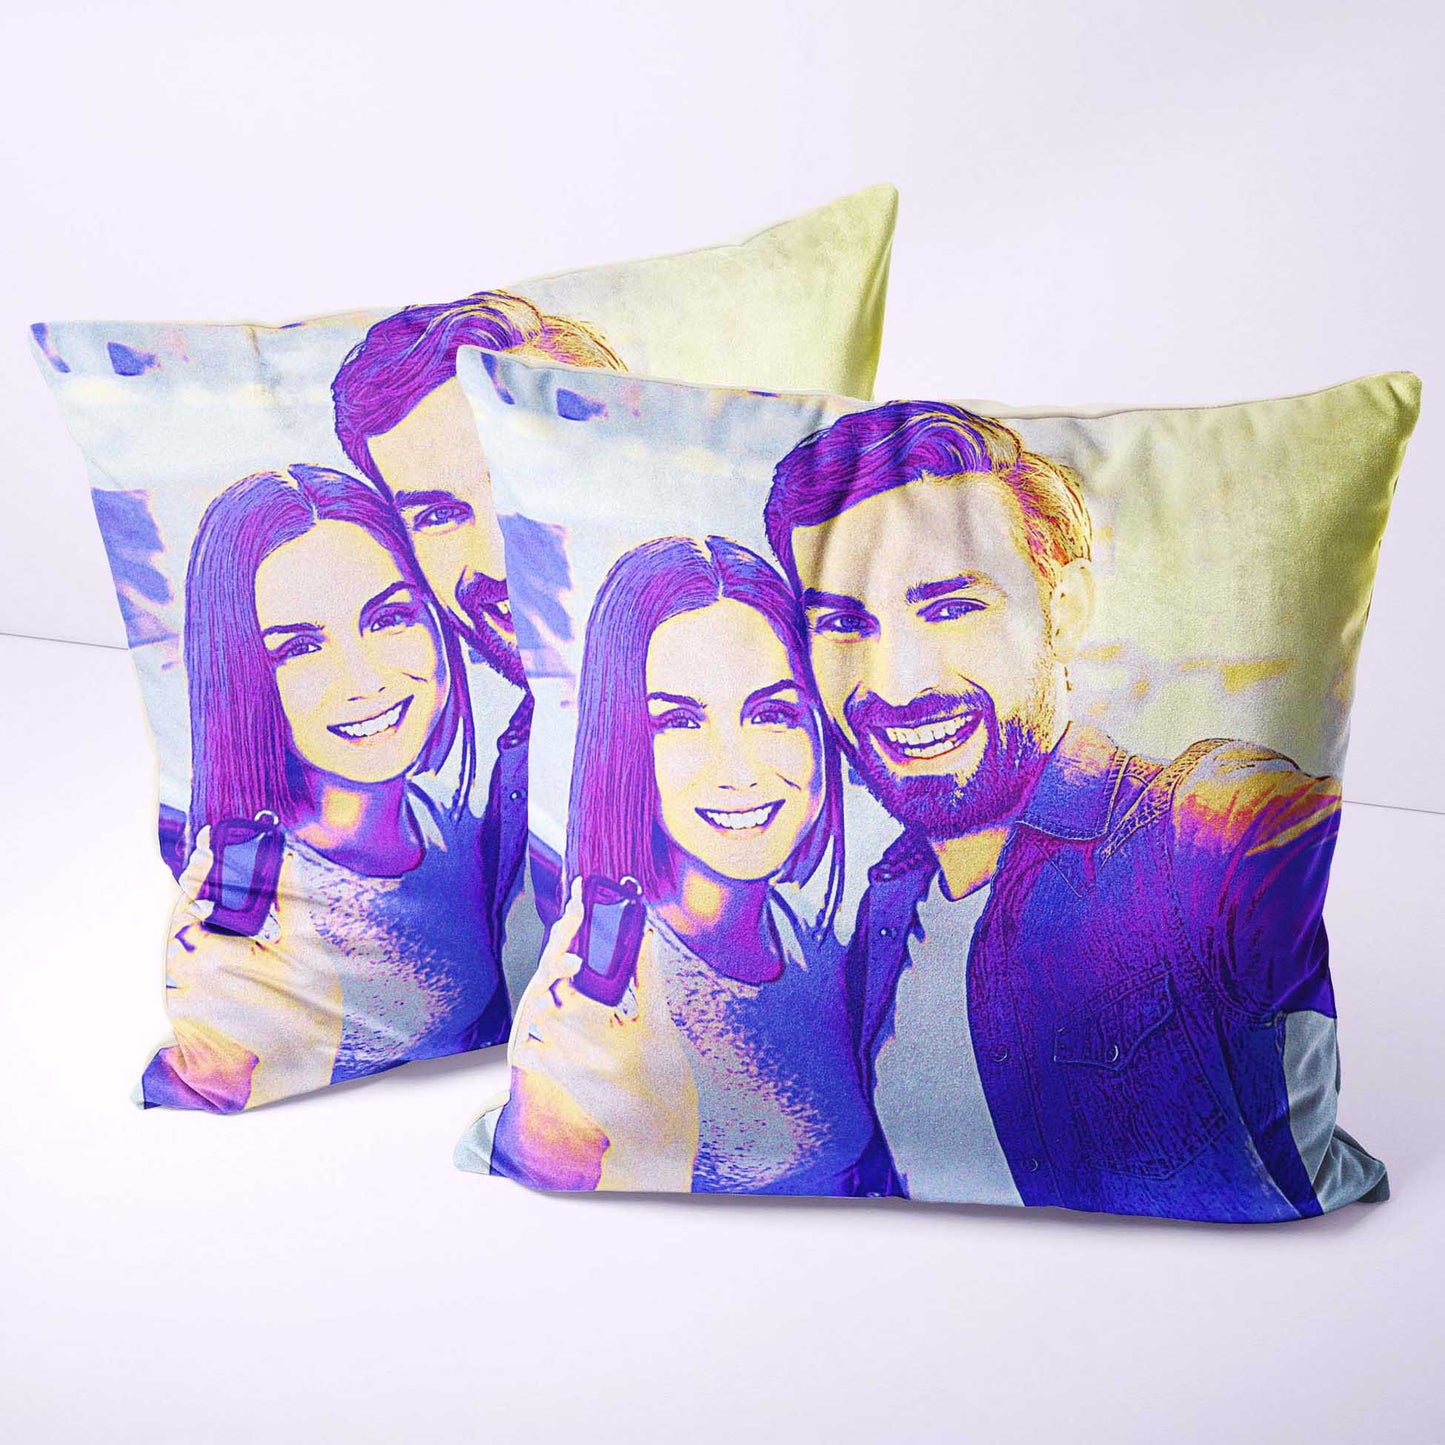 Experience ultimate comfort and style with our Personalised Blue and Purple Cushion. Crafted from soft velvet fabric, it offers a luxurious and cosy feel, perfect for lounging. This unique furnishing features original art